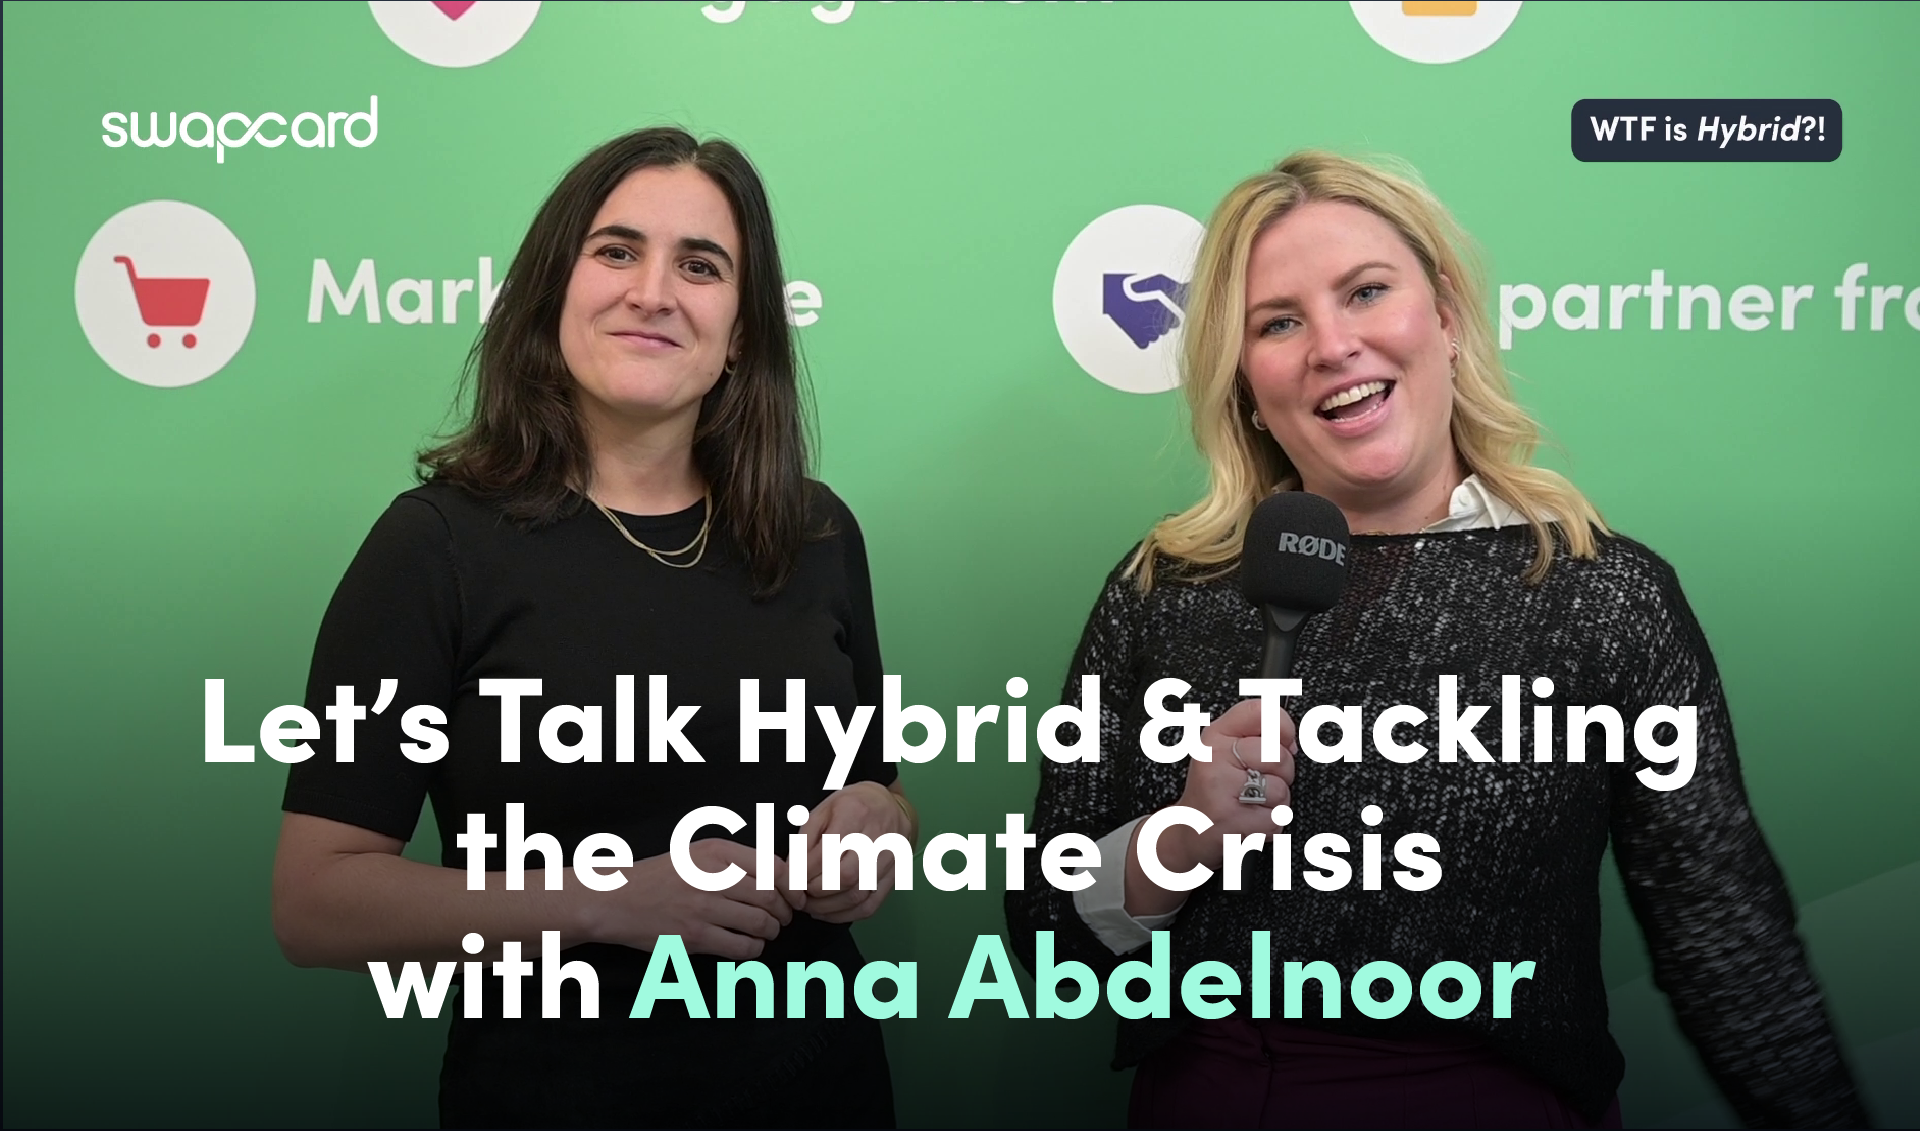 Let’s Talk Hybrid & Tackling the Climate Crisis with Anna Abdelnoor